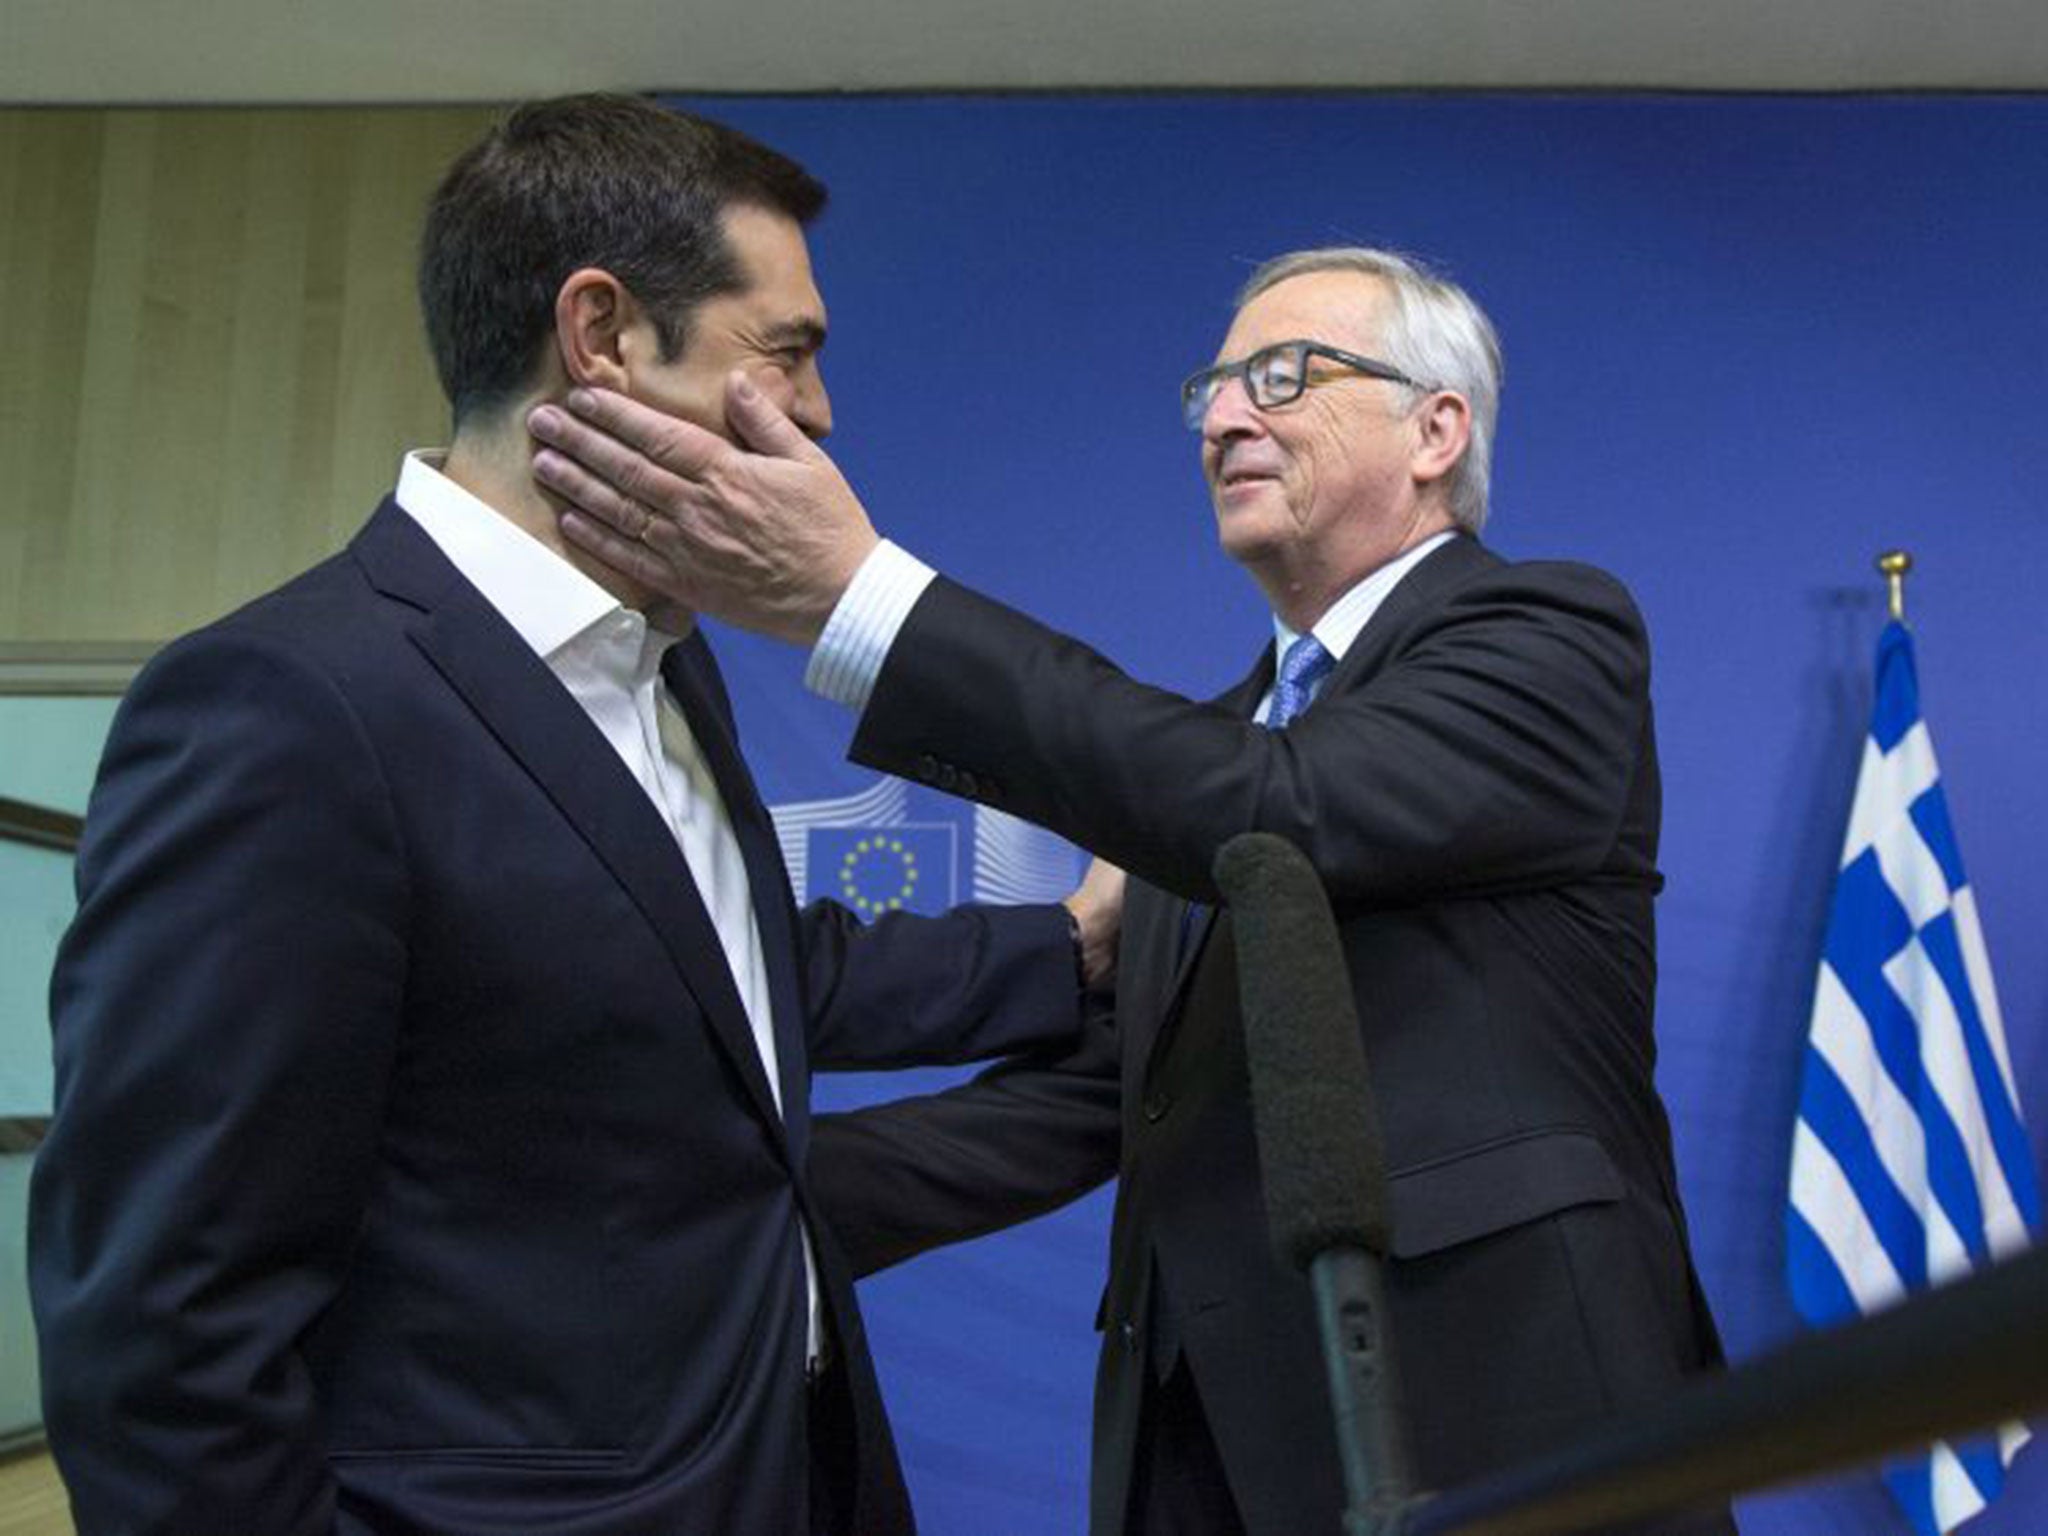 Greek Prime Minister Alexis Tsipras is welcomed by European Commission President Jean-Claude Juncker for a meeting ahead of a Eurozone emergency summit on Greece in Brussels, Belgium June 22.